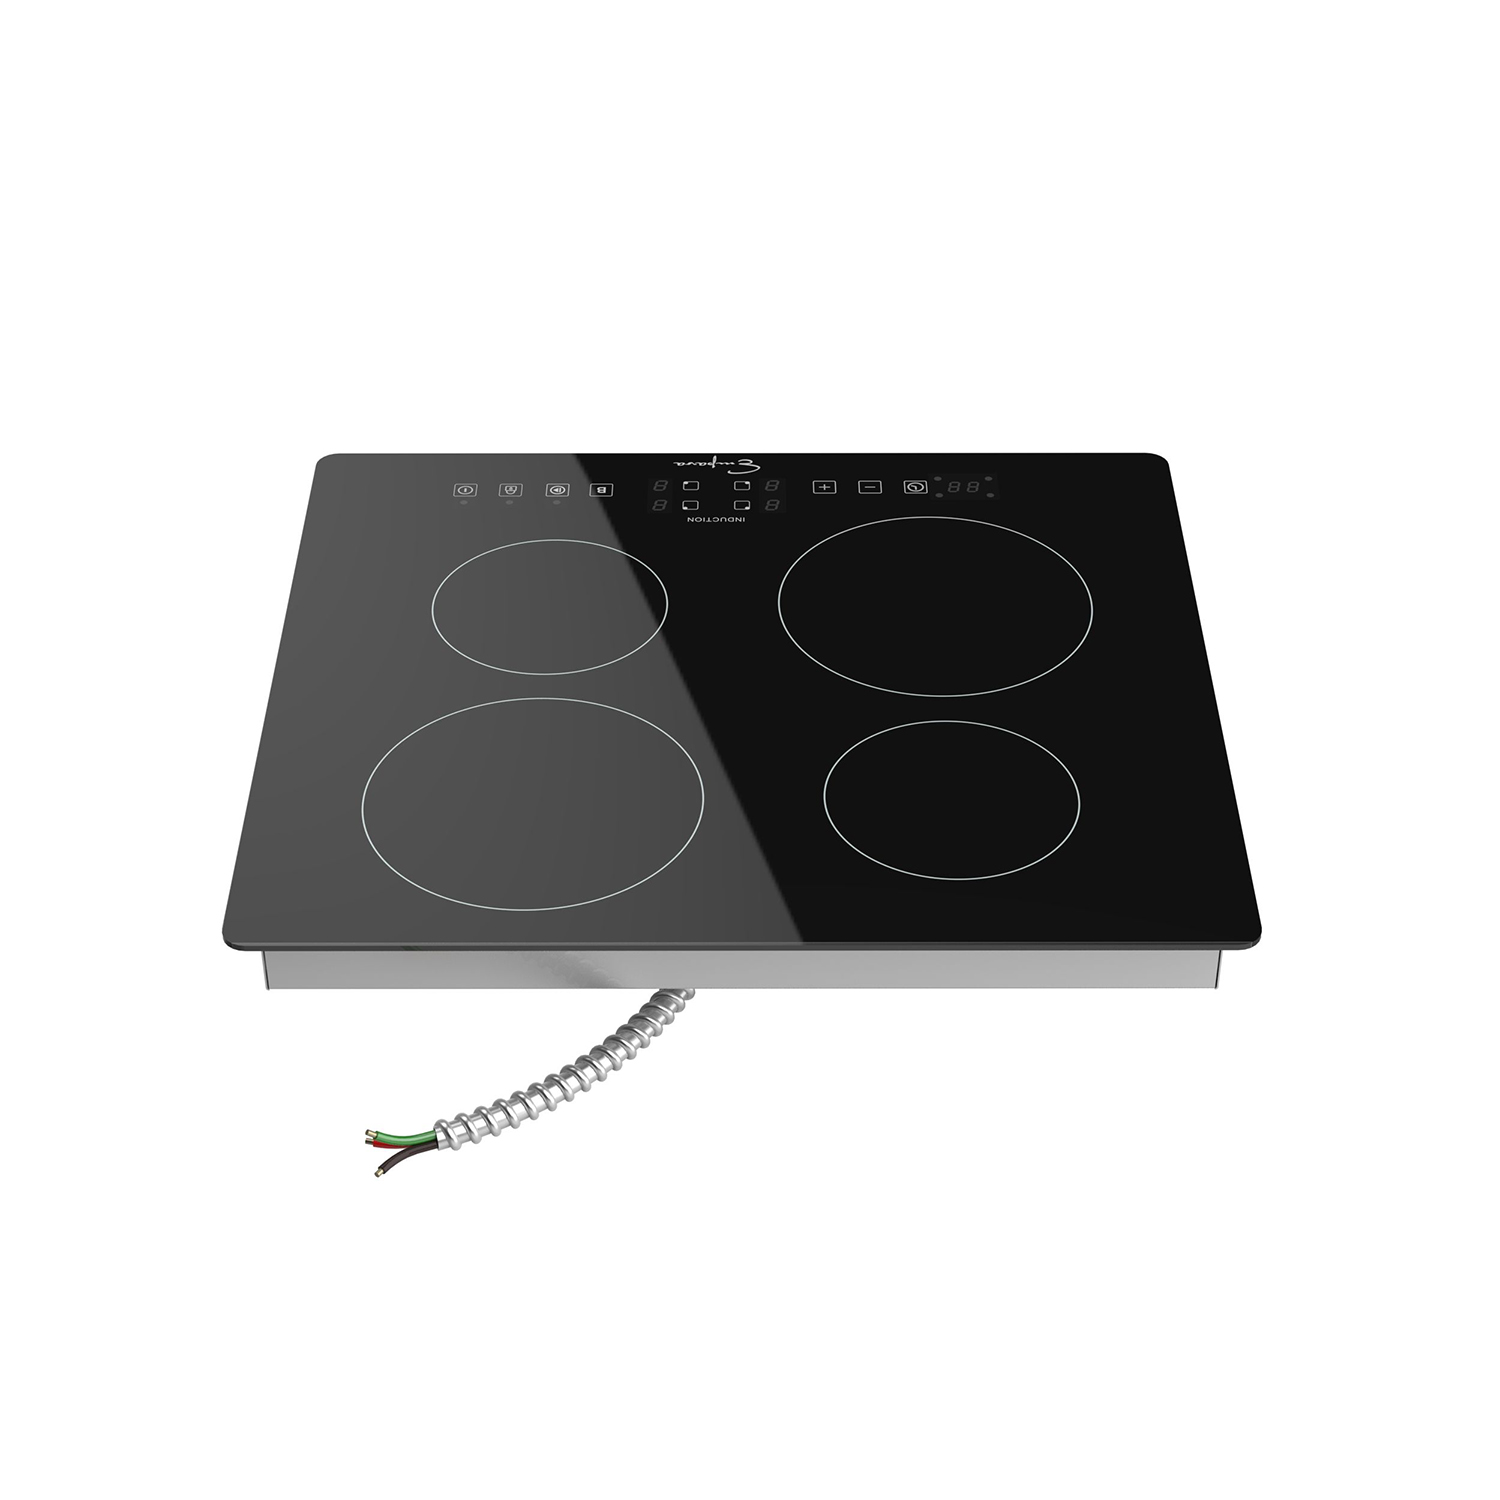  Empava 24 Built-in Electric Induction Cooktop with 4 Elements  Power Boost Burners in Black Vitro Ceramic Glass, 24 Inch : Appliances